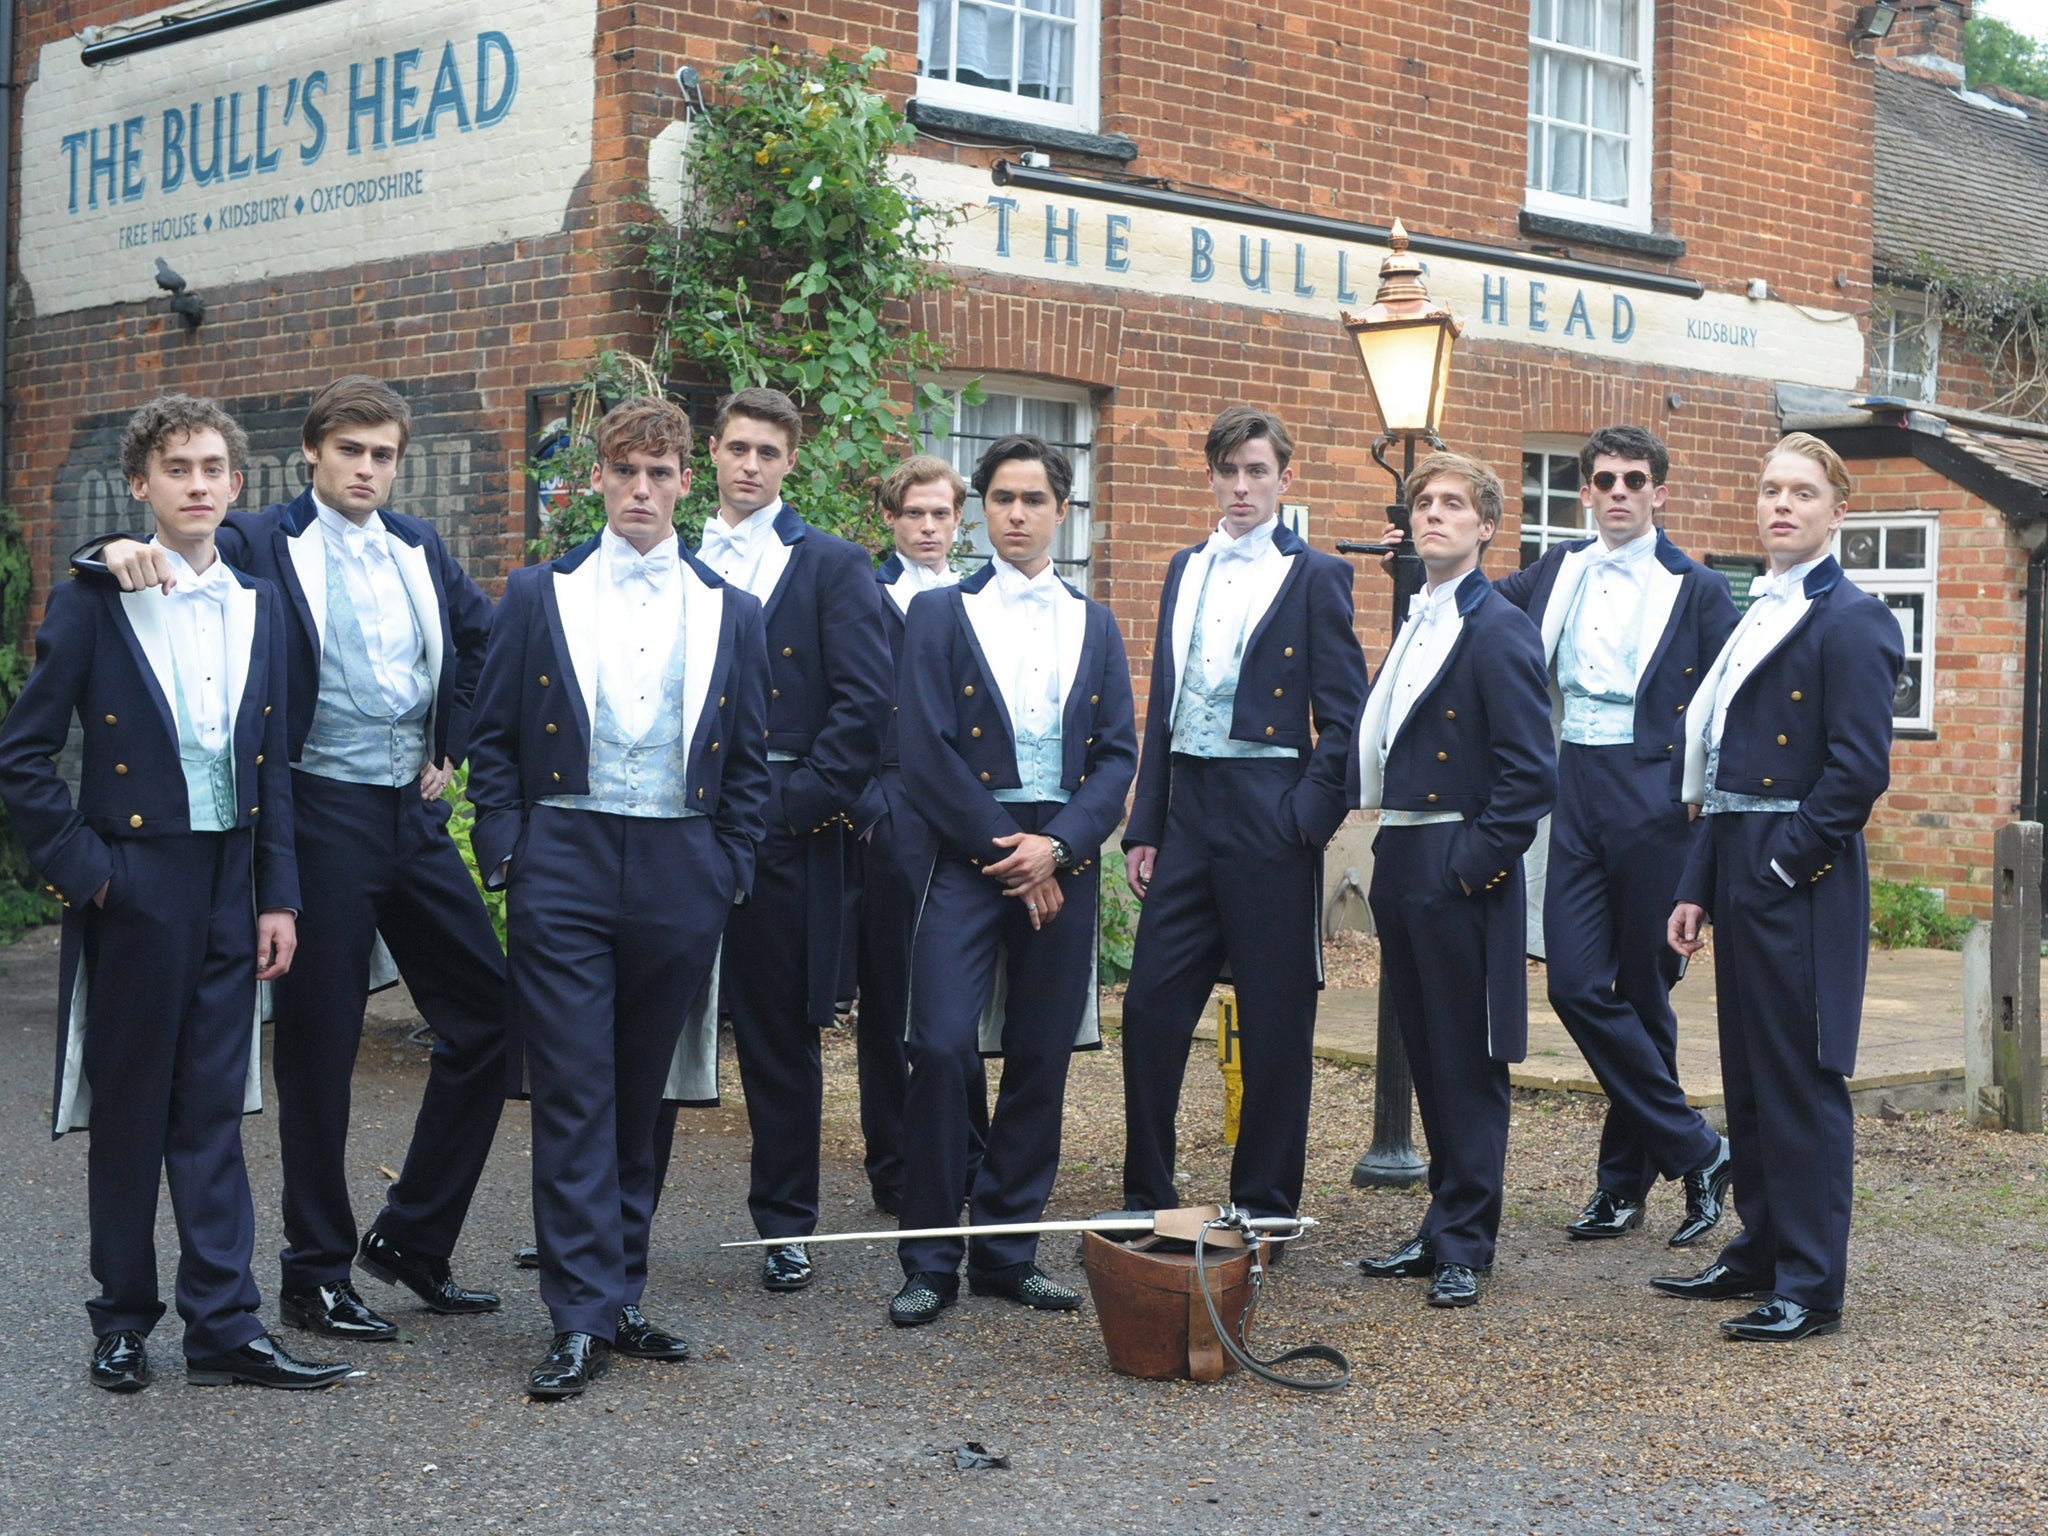 A still from the Riot Club, which depicts an elite dining club